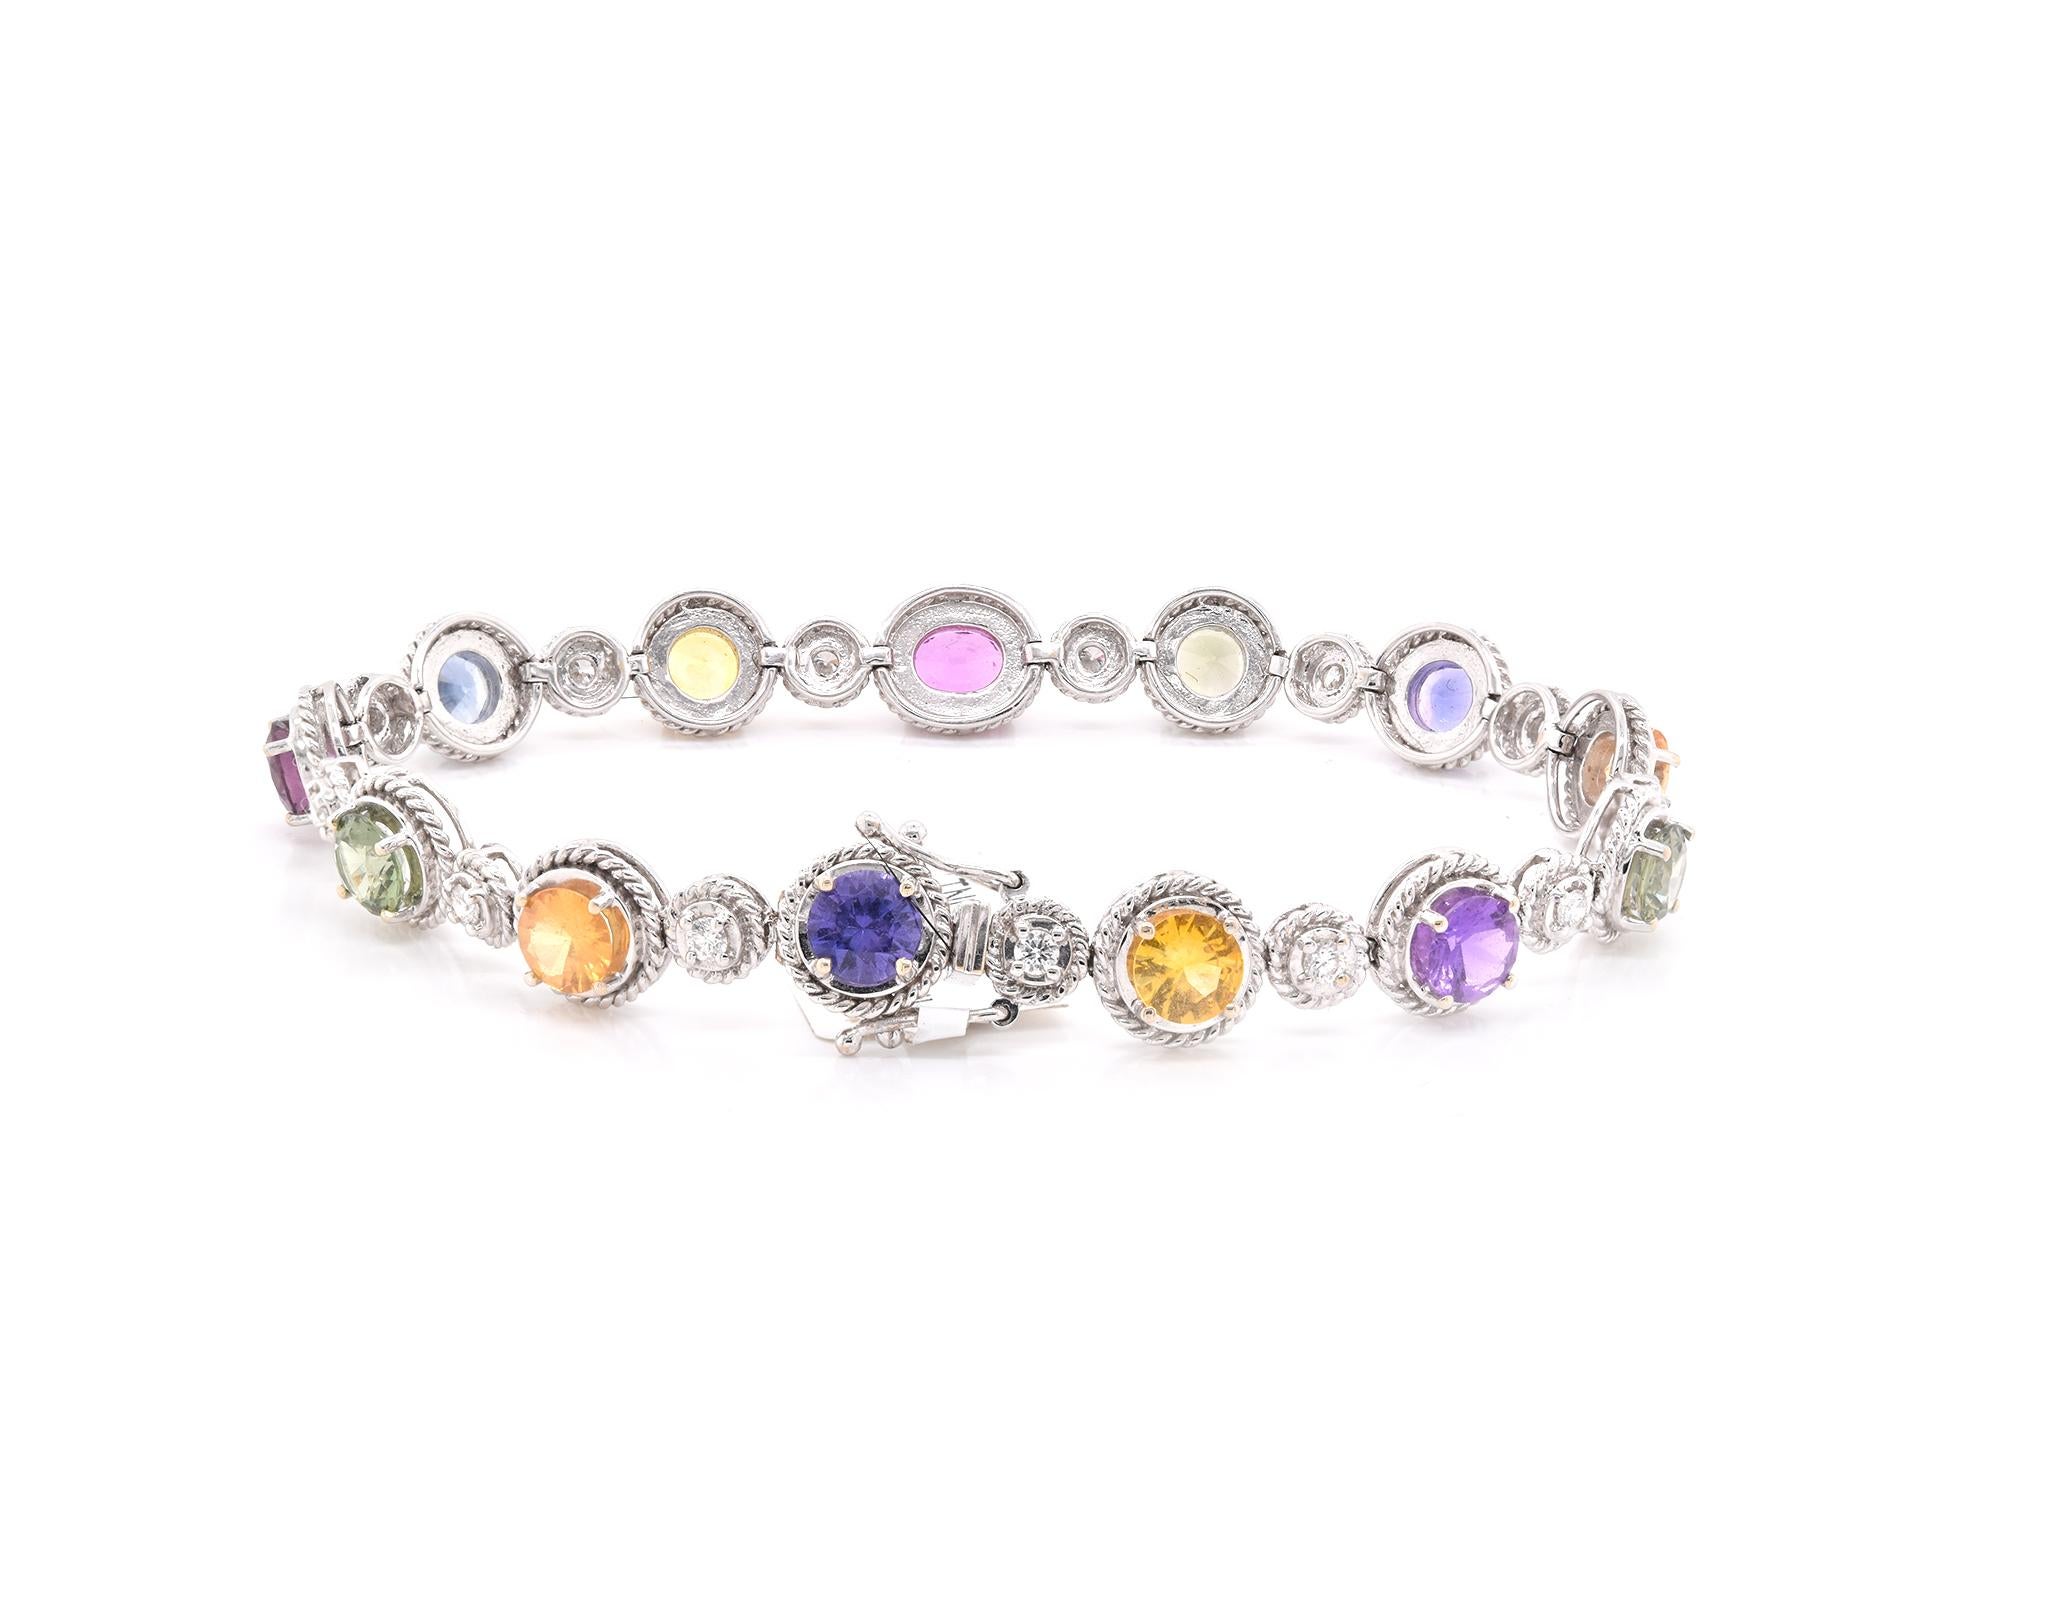 Designer: custom
Material: 18K white gold
Diamond: 13 round brilliant cut = 0.55cttw
Color: G
Clarity: SI
Sapphire: 9.39cttw Rainbow
Weight:  21.18 grams
Dimensions: bracelet measures 7.25-inches
